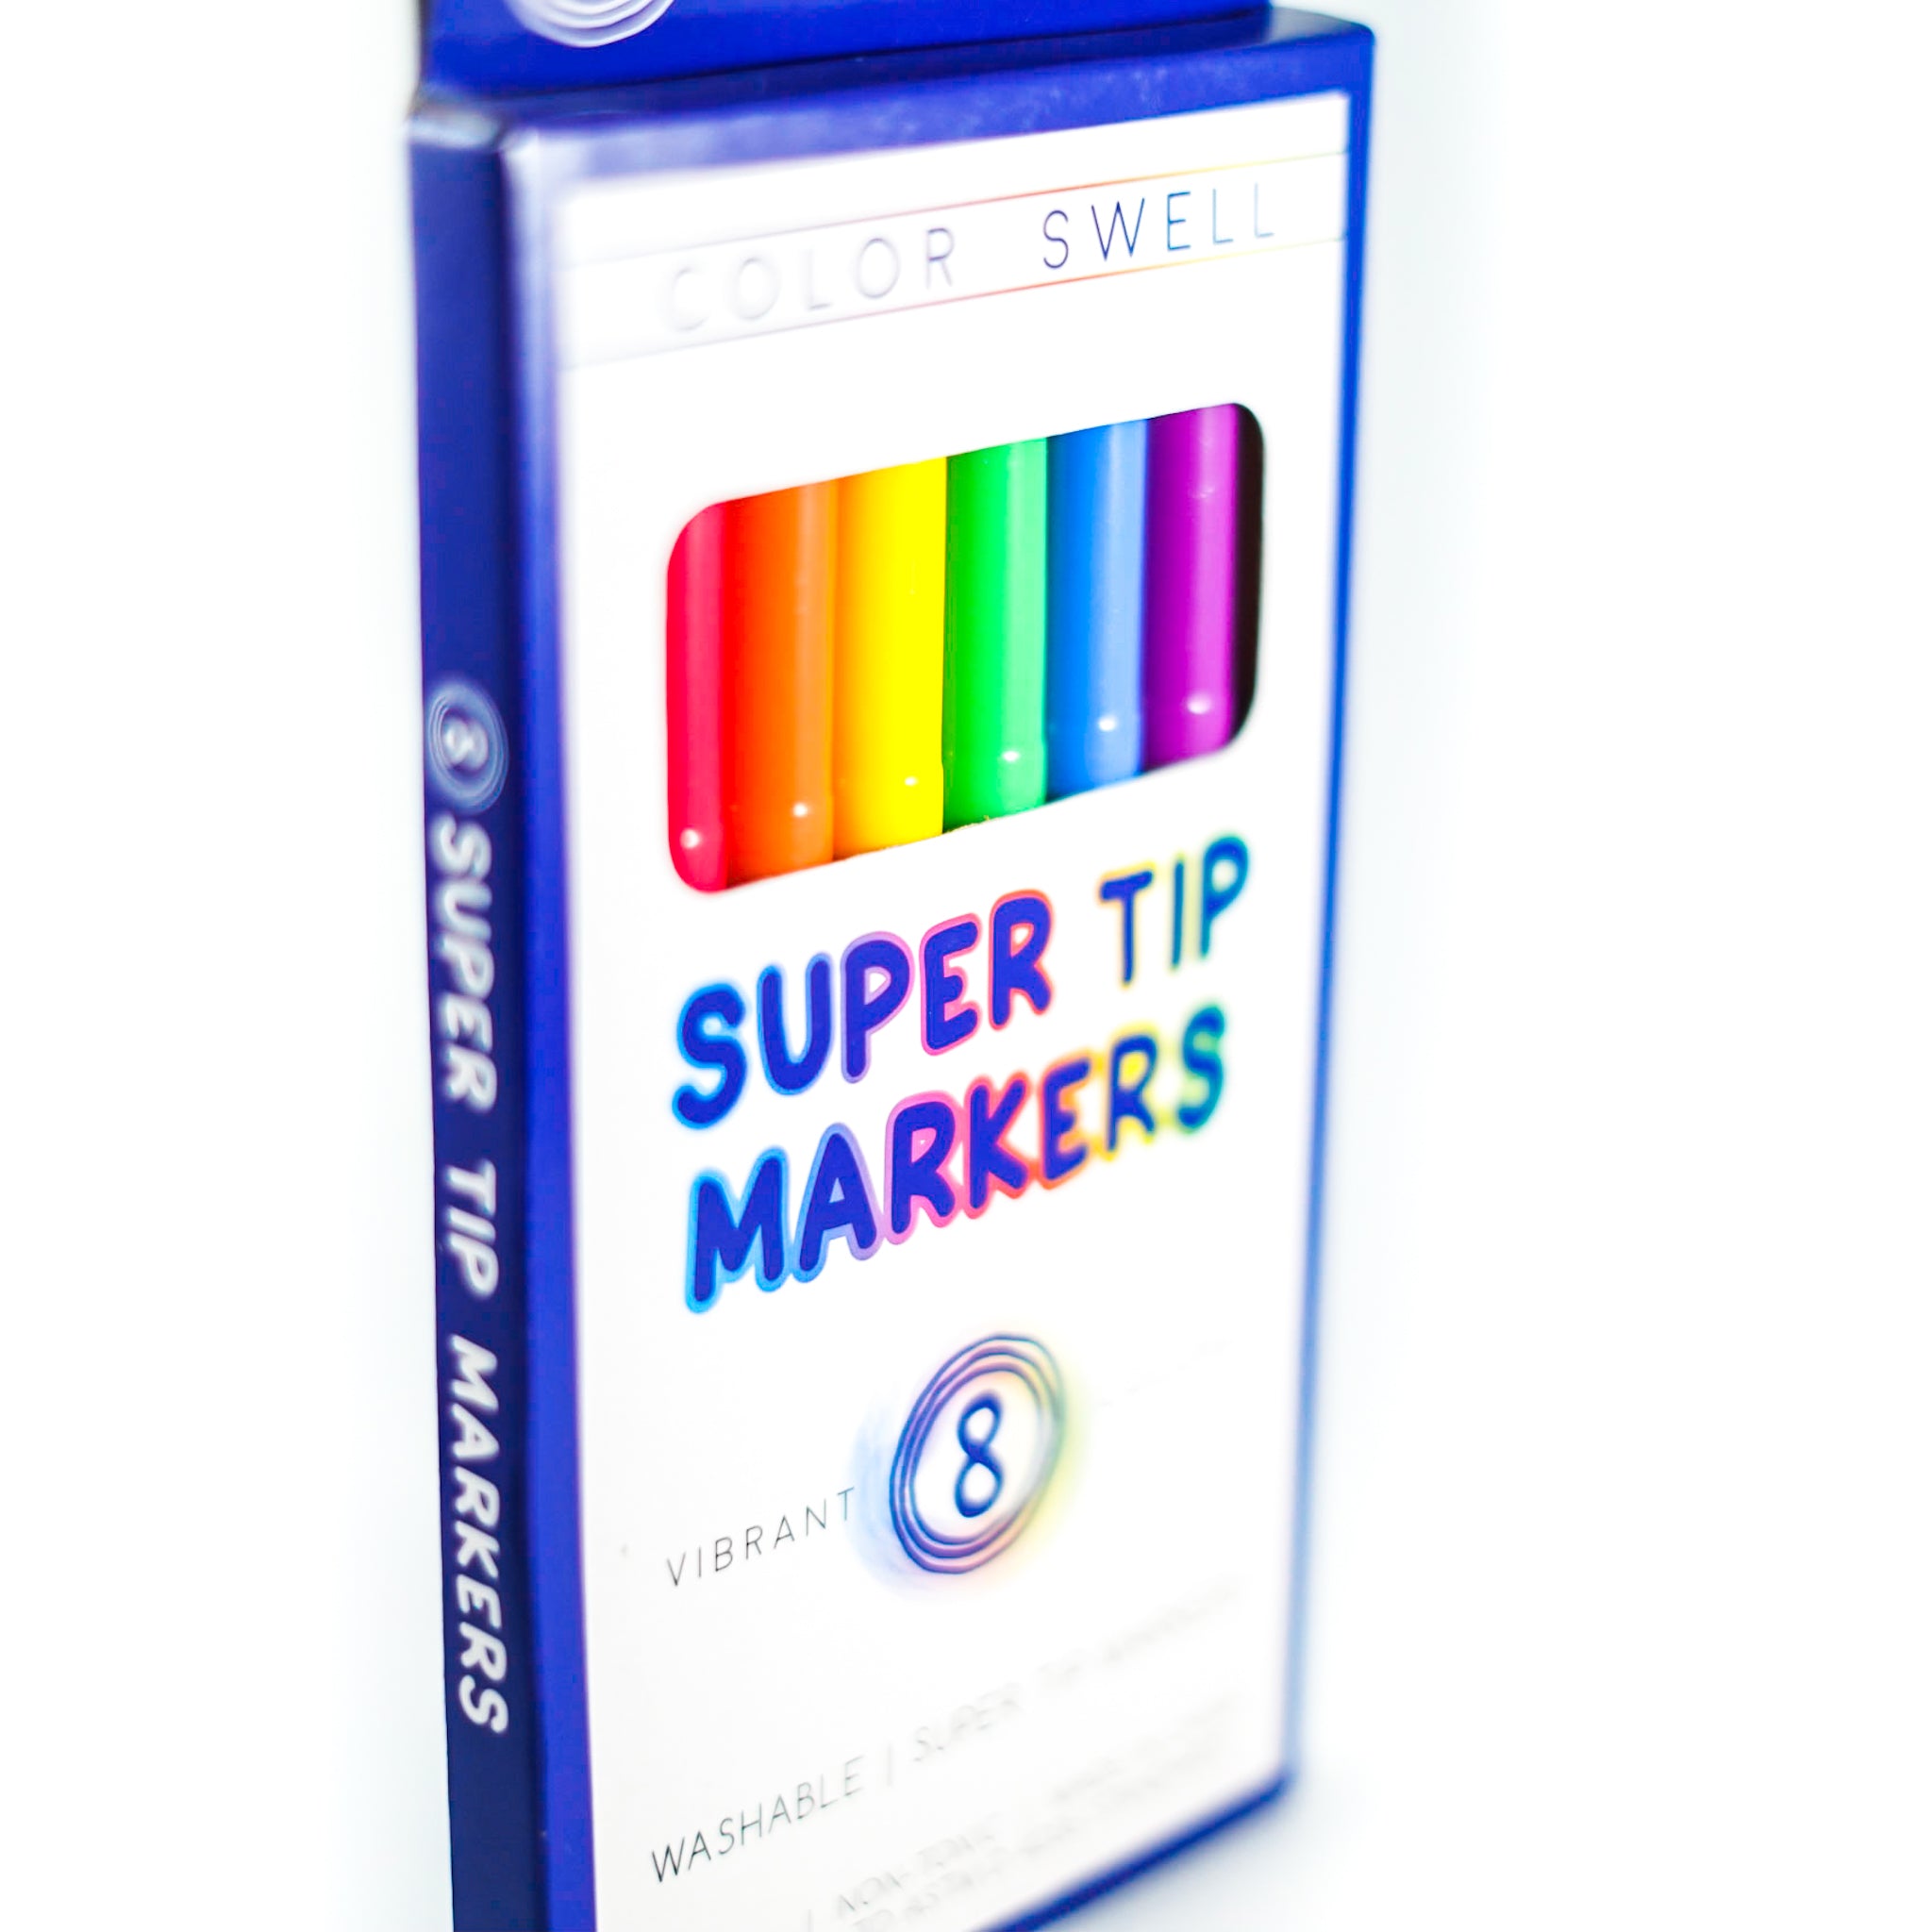 Color Swell Super Tip Washable Bulk Markers Pack 36 Boxes of 8